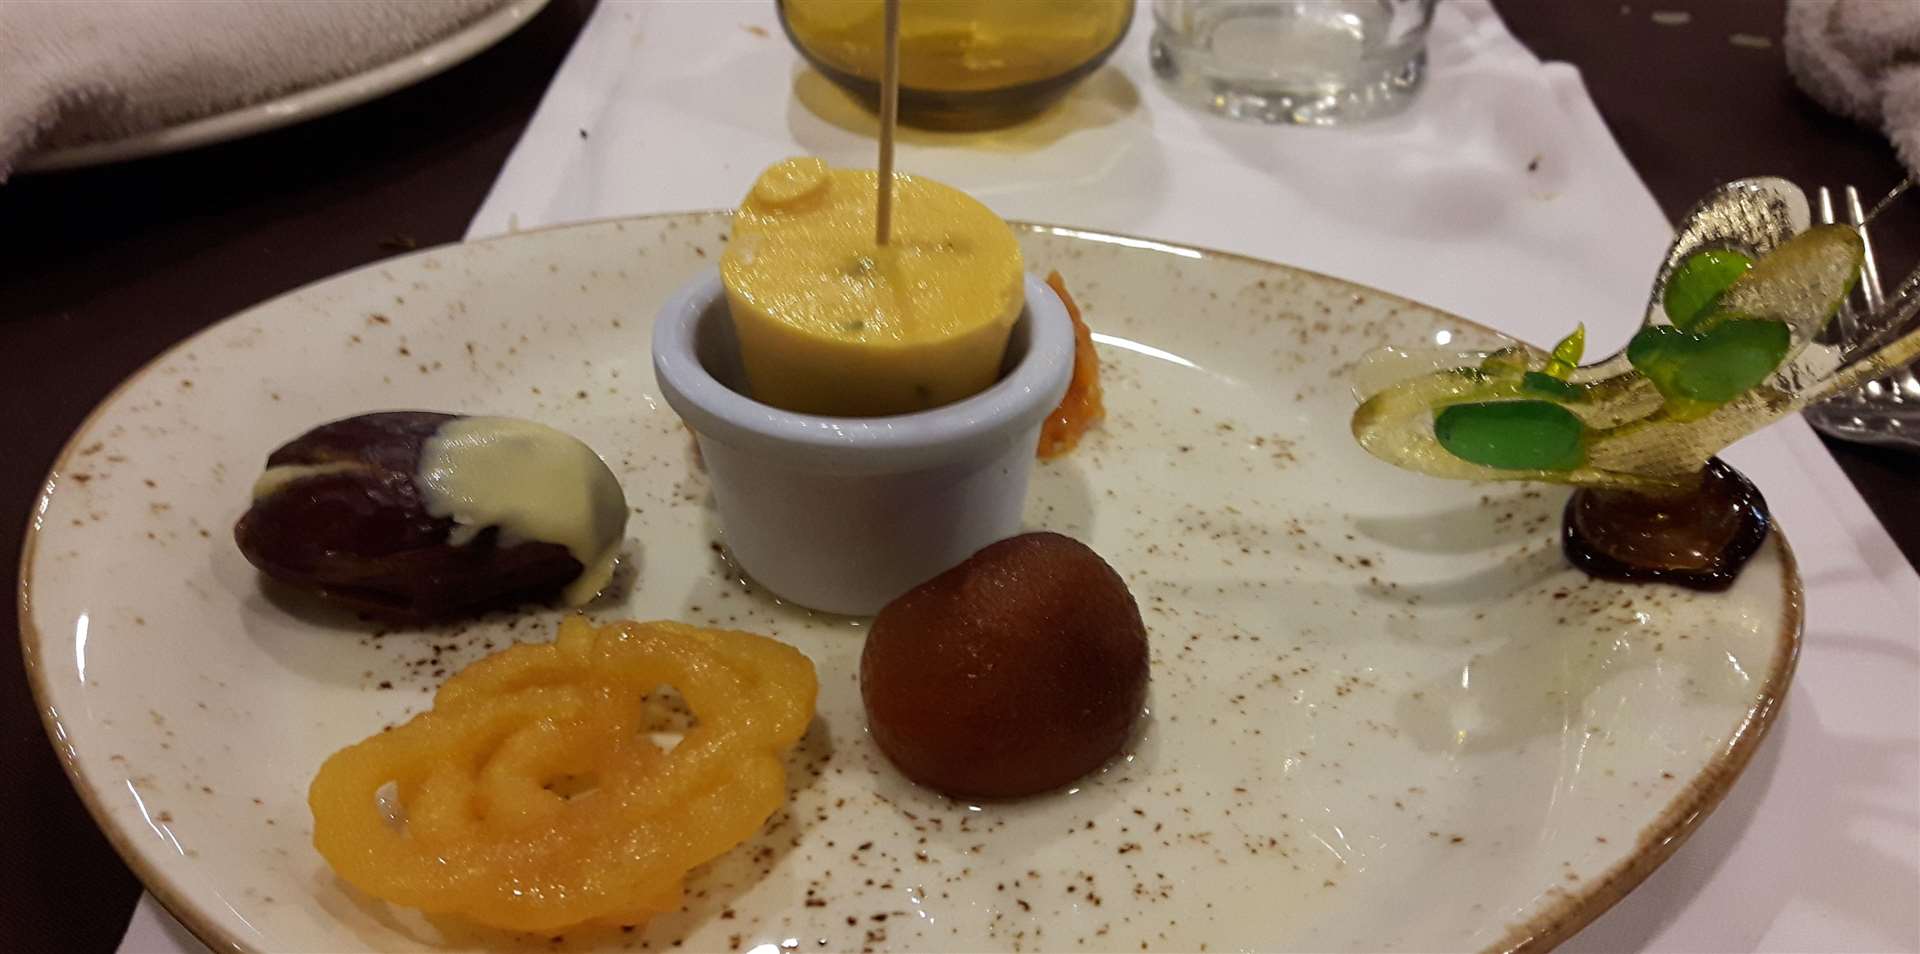 A trio of Indian deserts